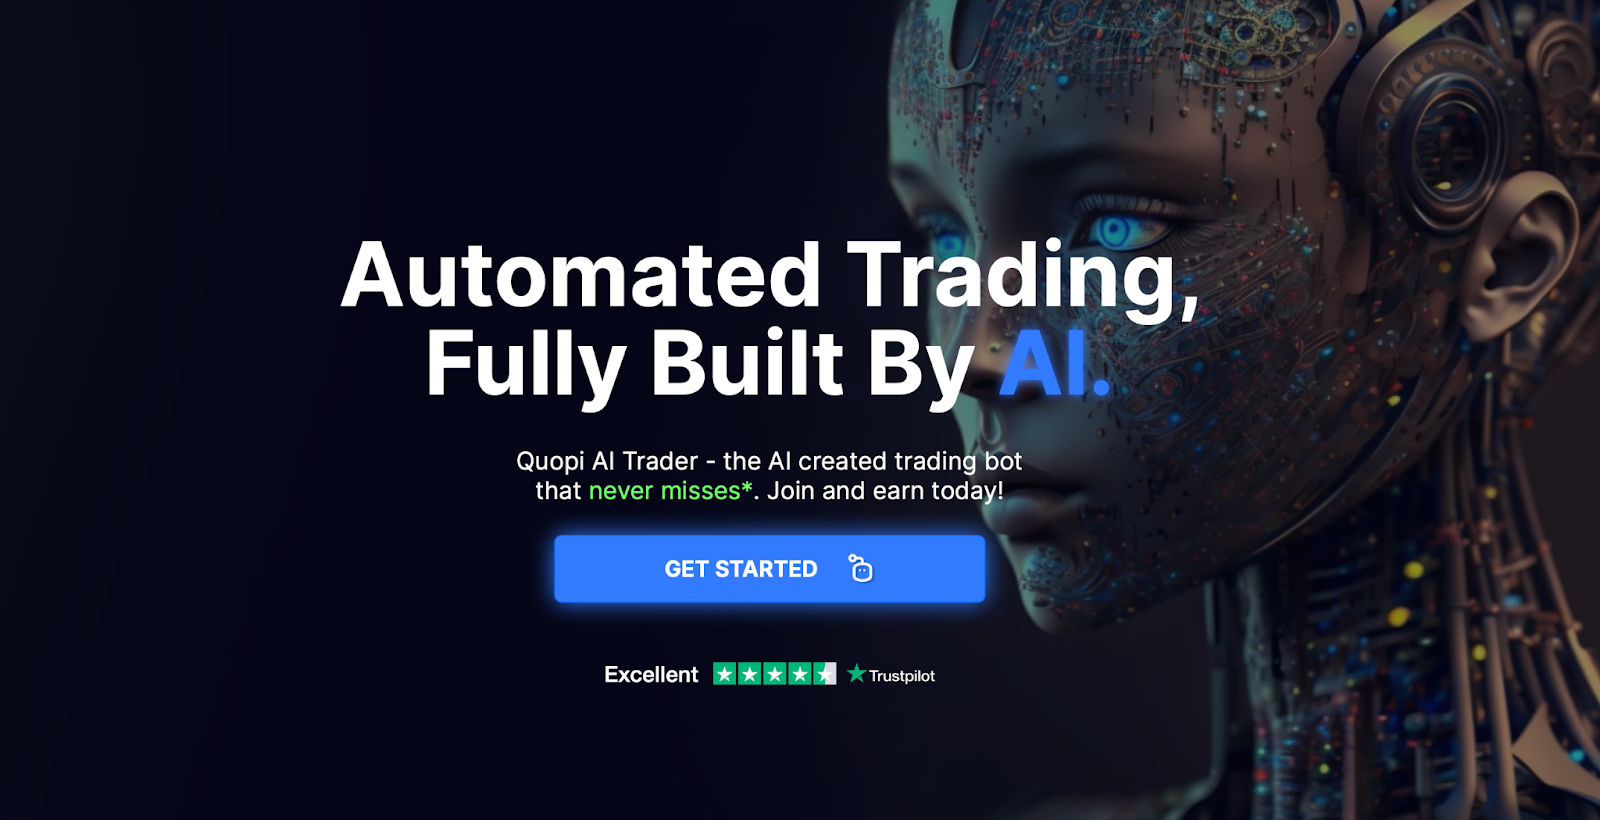 Quopi.AI uses trading analysis tools and advanced algorithms 